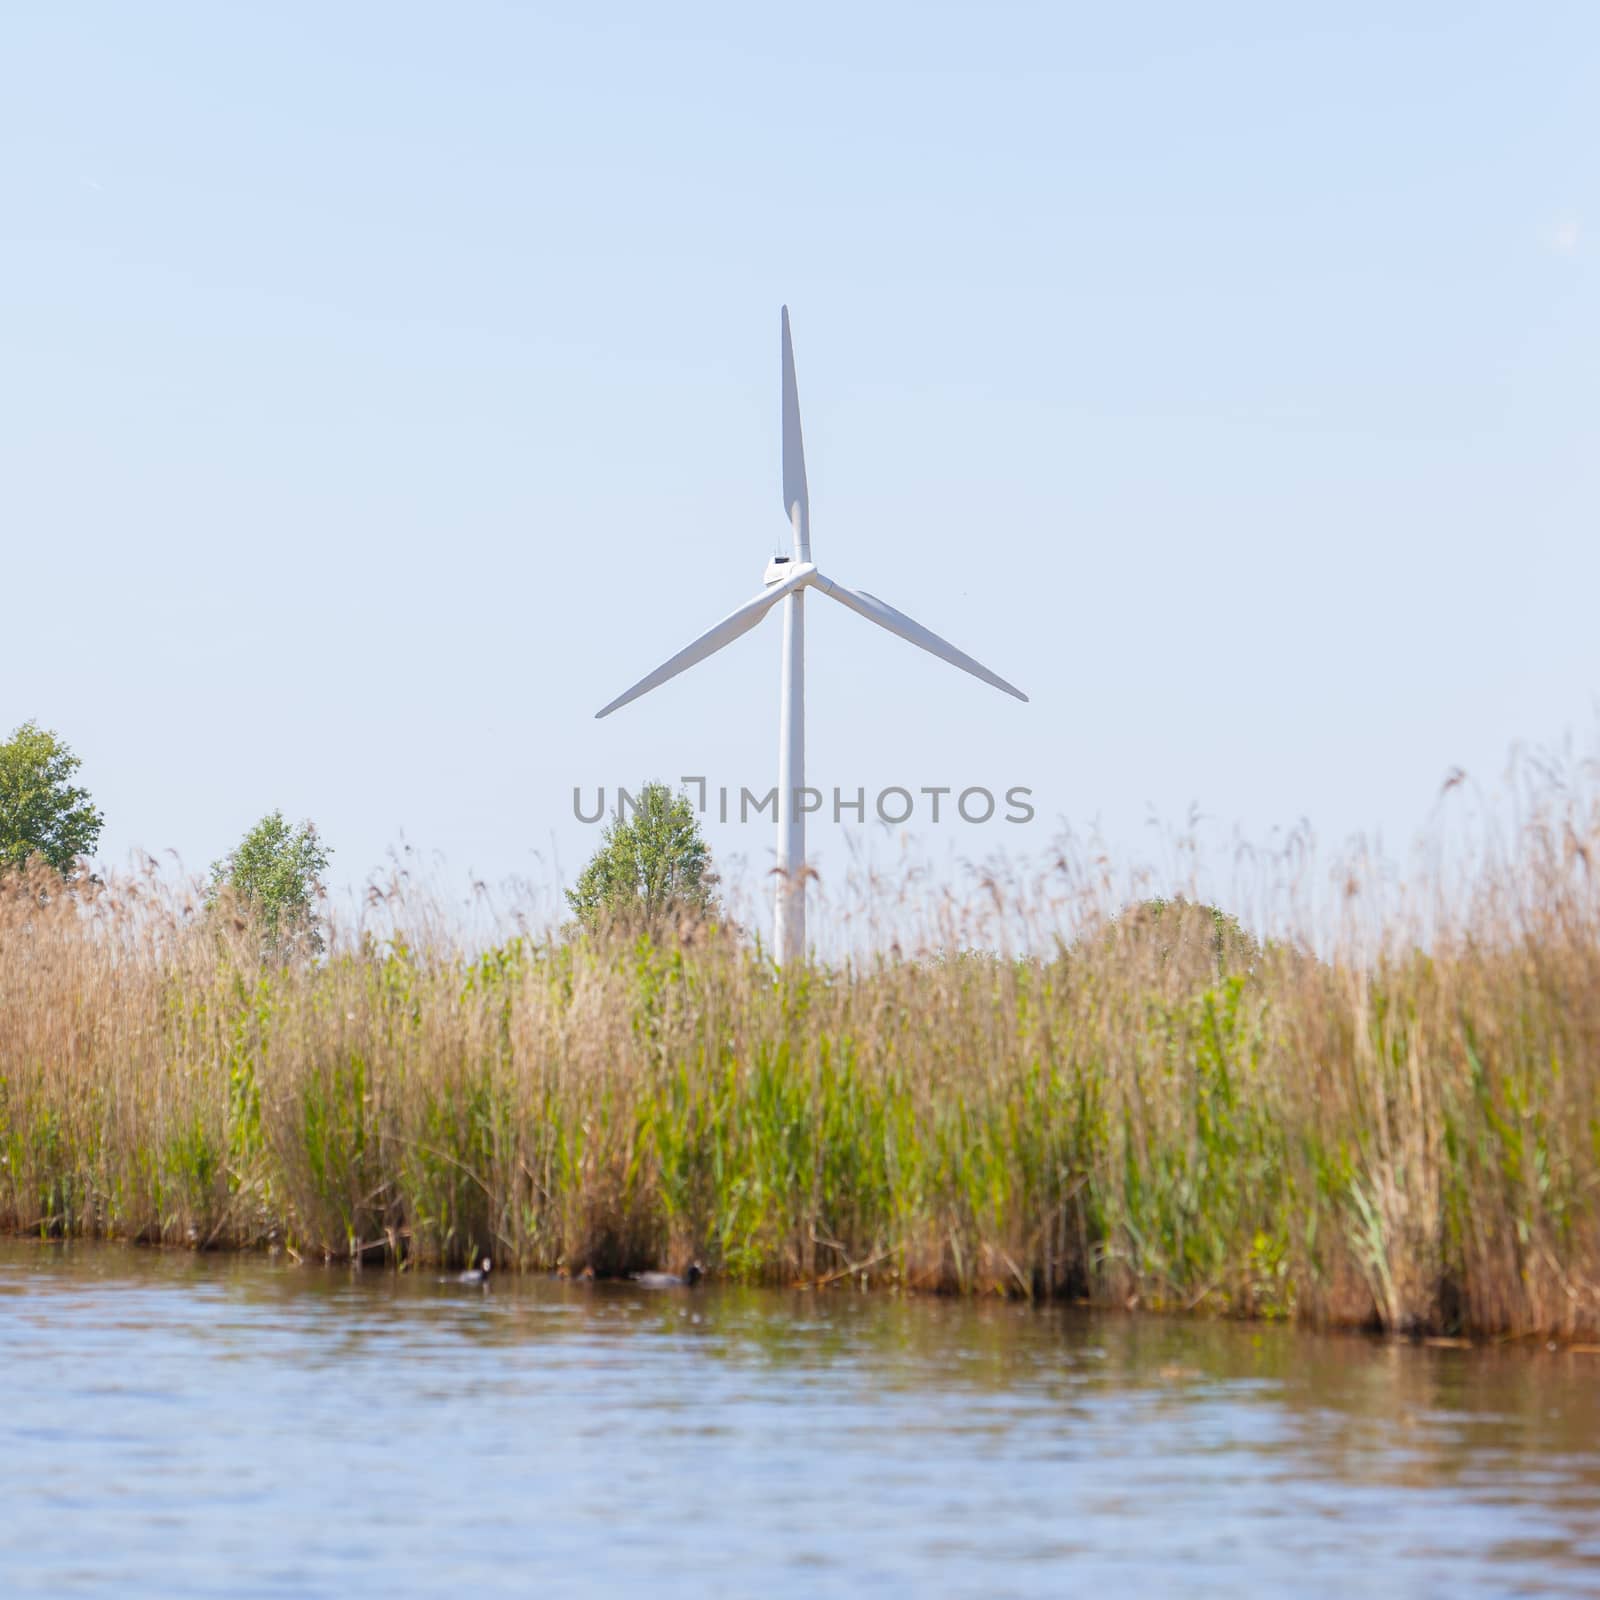 Concept of wind energy by michaklootwijk